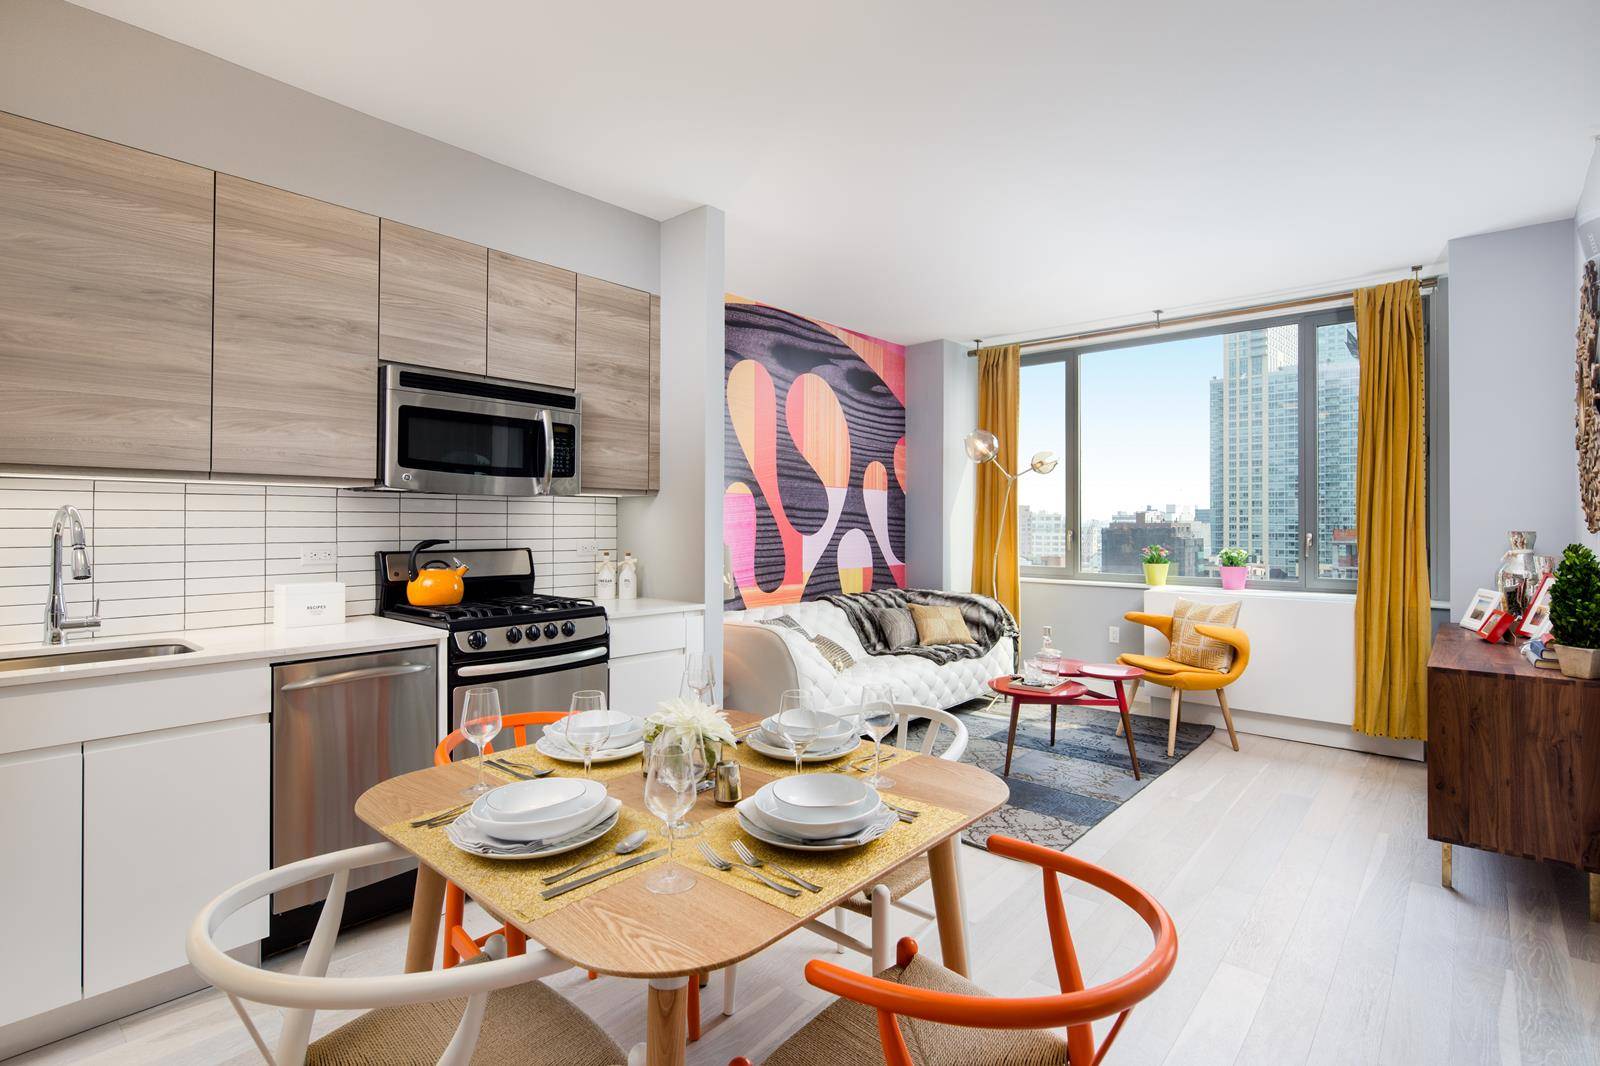 ONE MONTH FREE, NO Broker Fees, amp ; FREE Amenities Net Effective Price Displayed on a 13 Month LeaseSunny south east facing one bedroom in Long Island City.